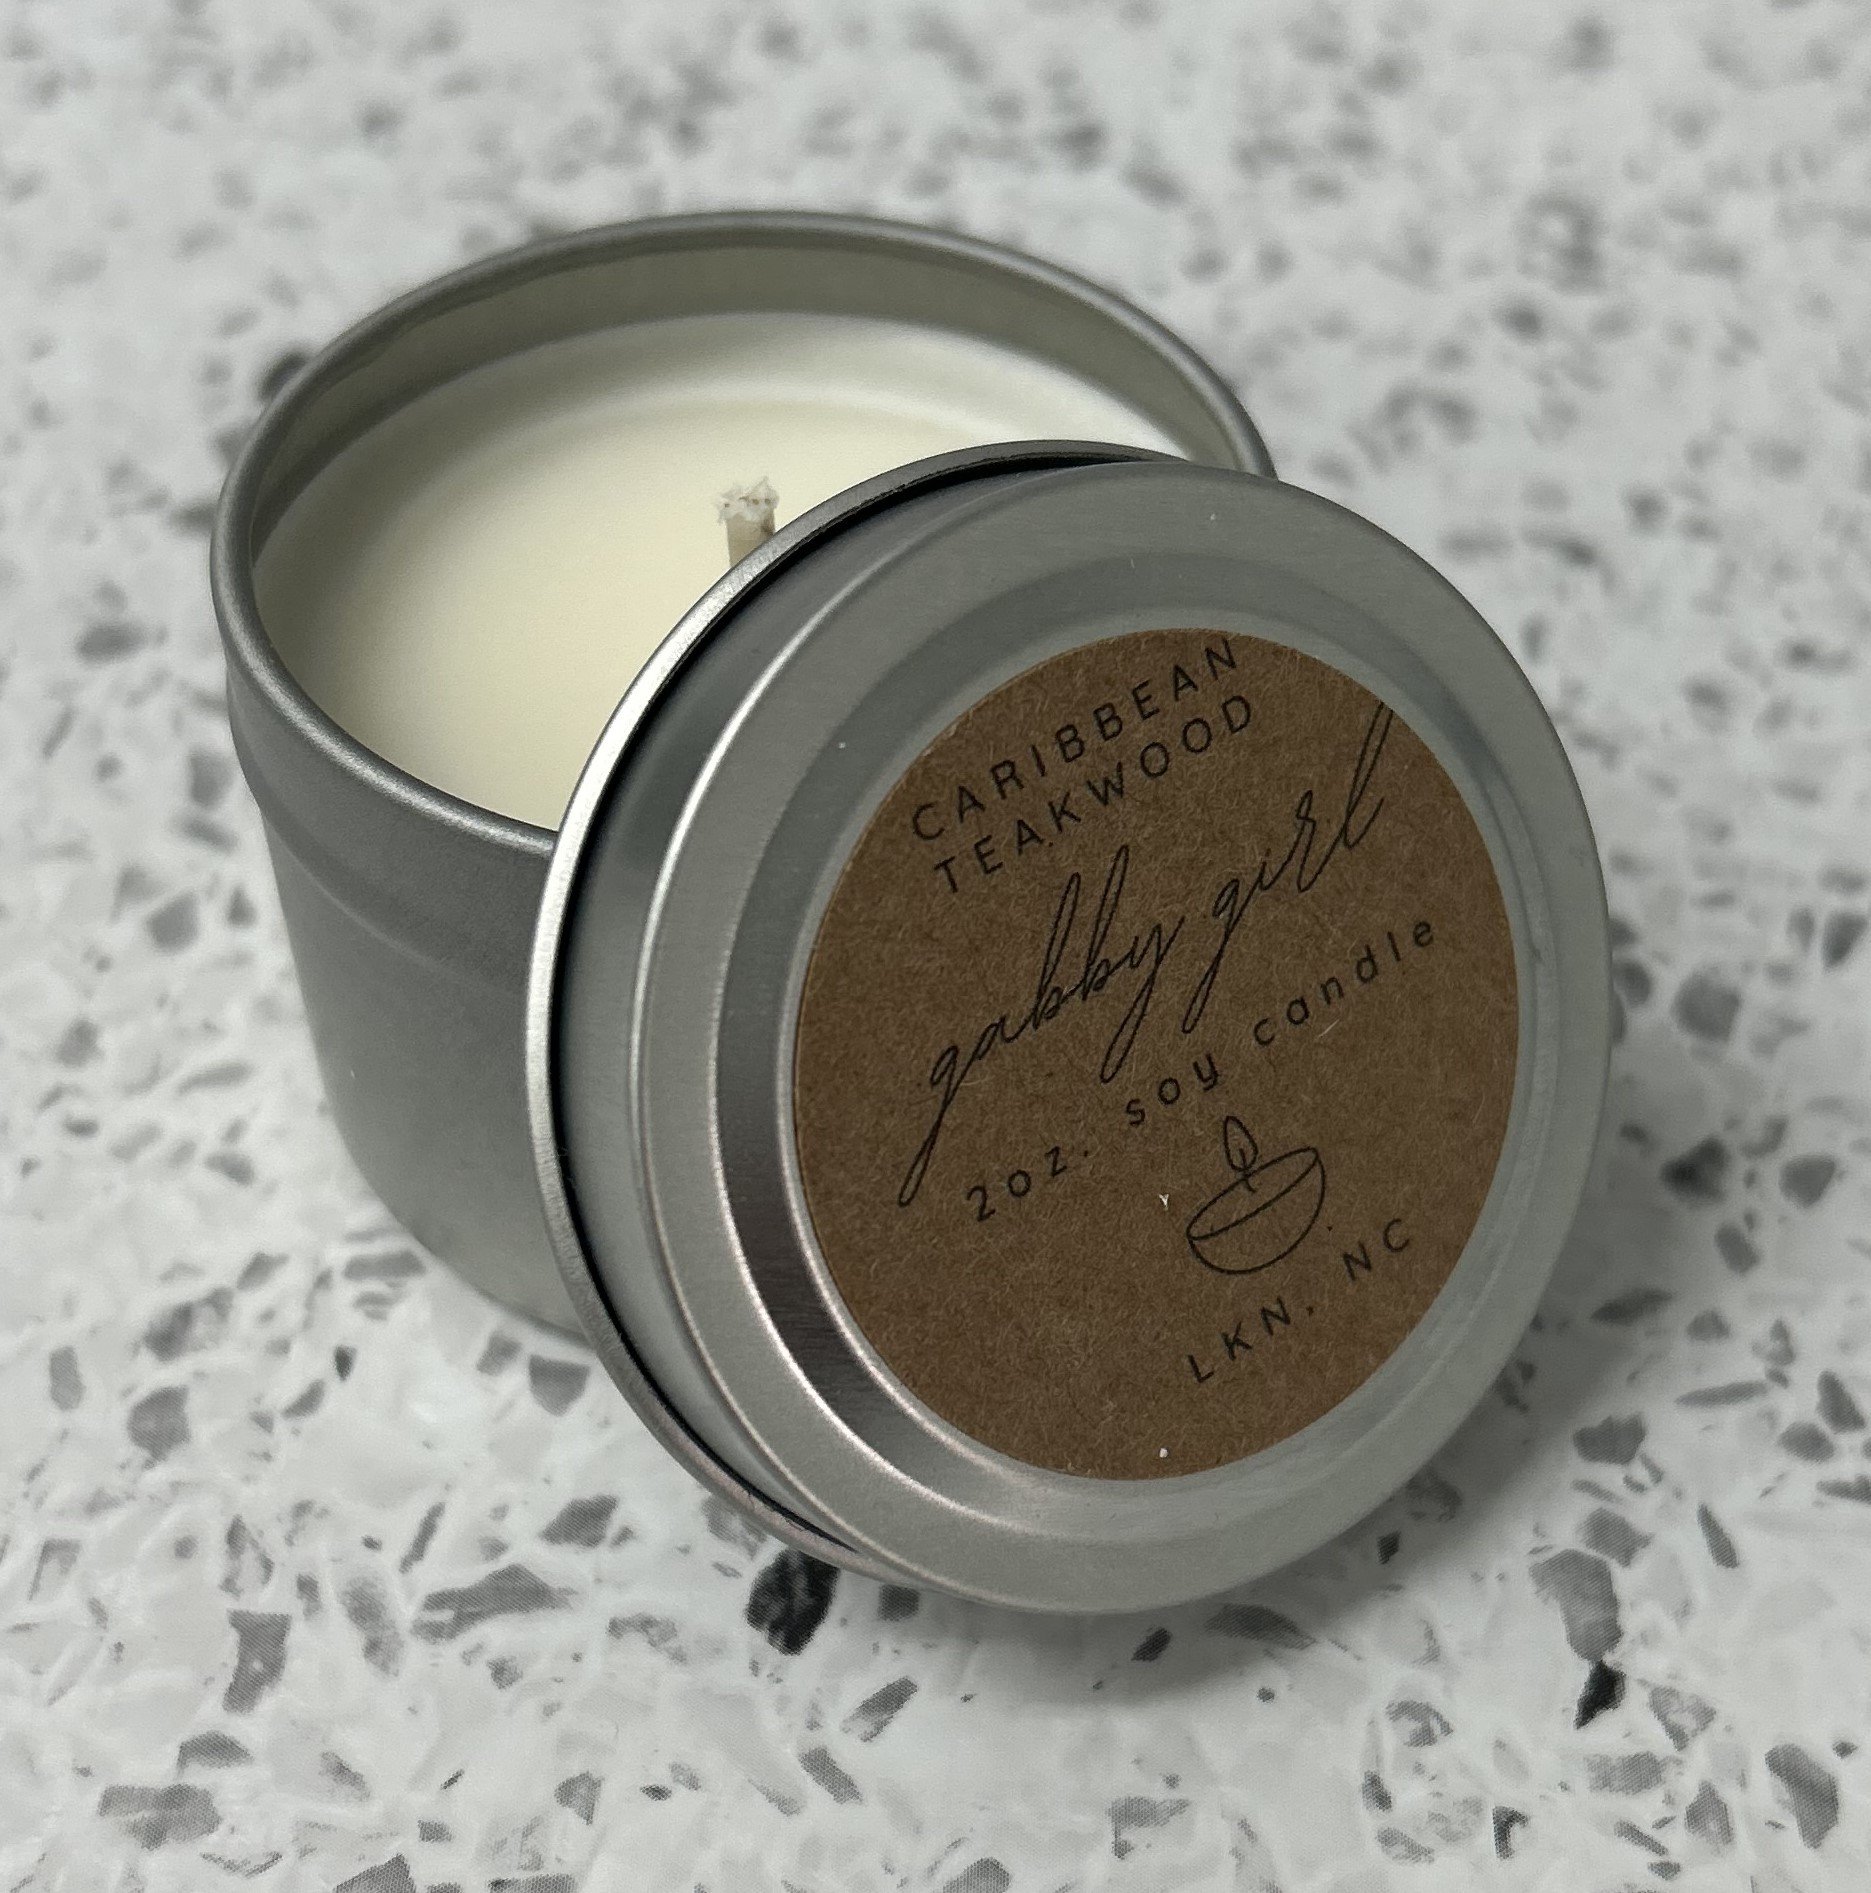 Caribbean Teakwood Scented Candle